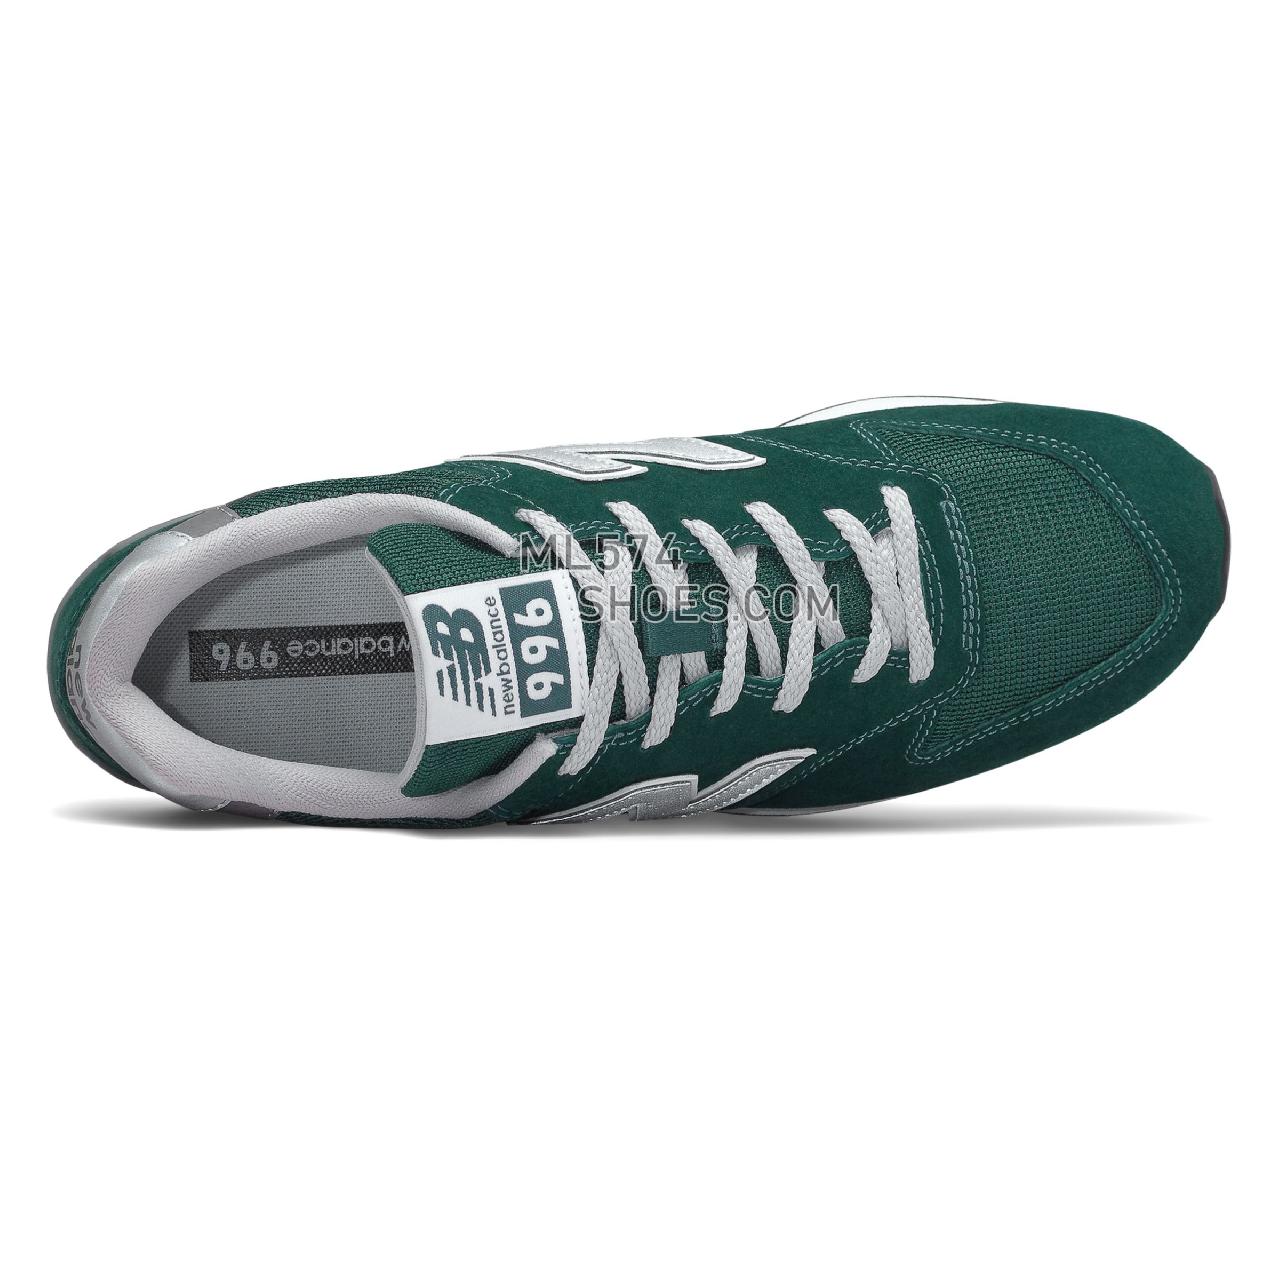 New Balance 996v2 - Men's Classic Sneakers - Team Forest Green with Silver - CM996BS